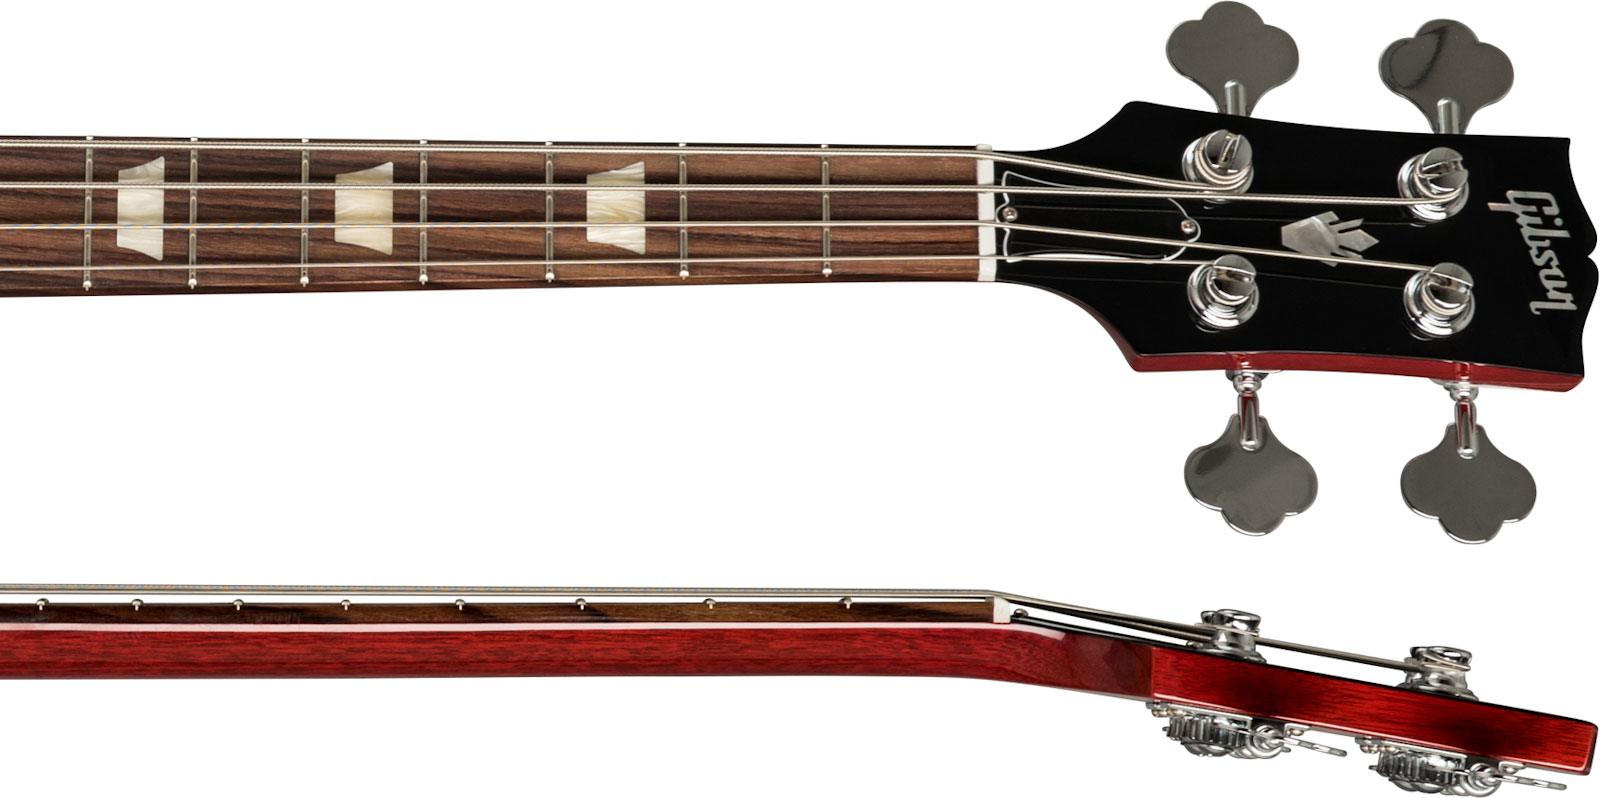 Gibson Sg Standard Bass Original Short Scale Rw - Heritage Cherry - Solid body electric bass - Variation 3